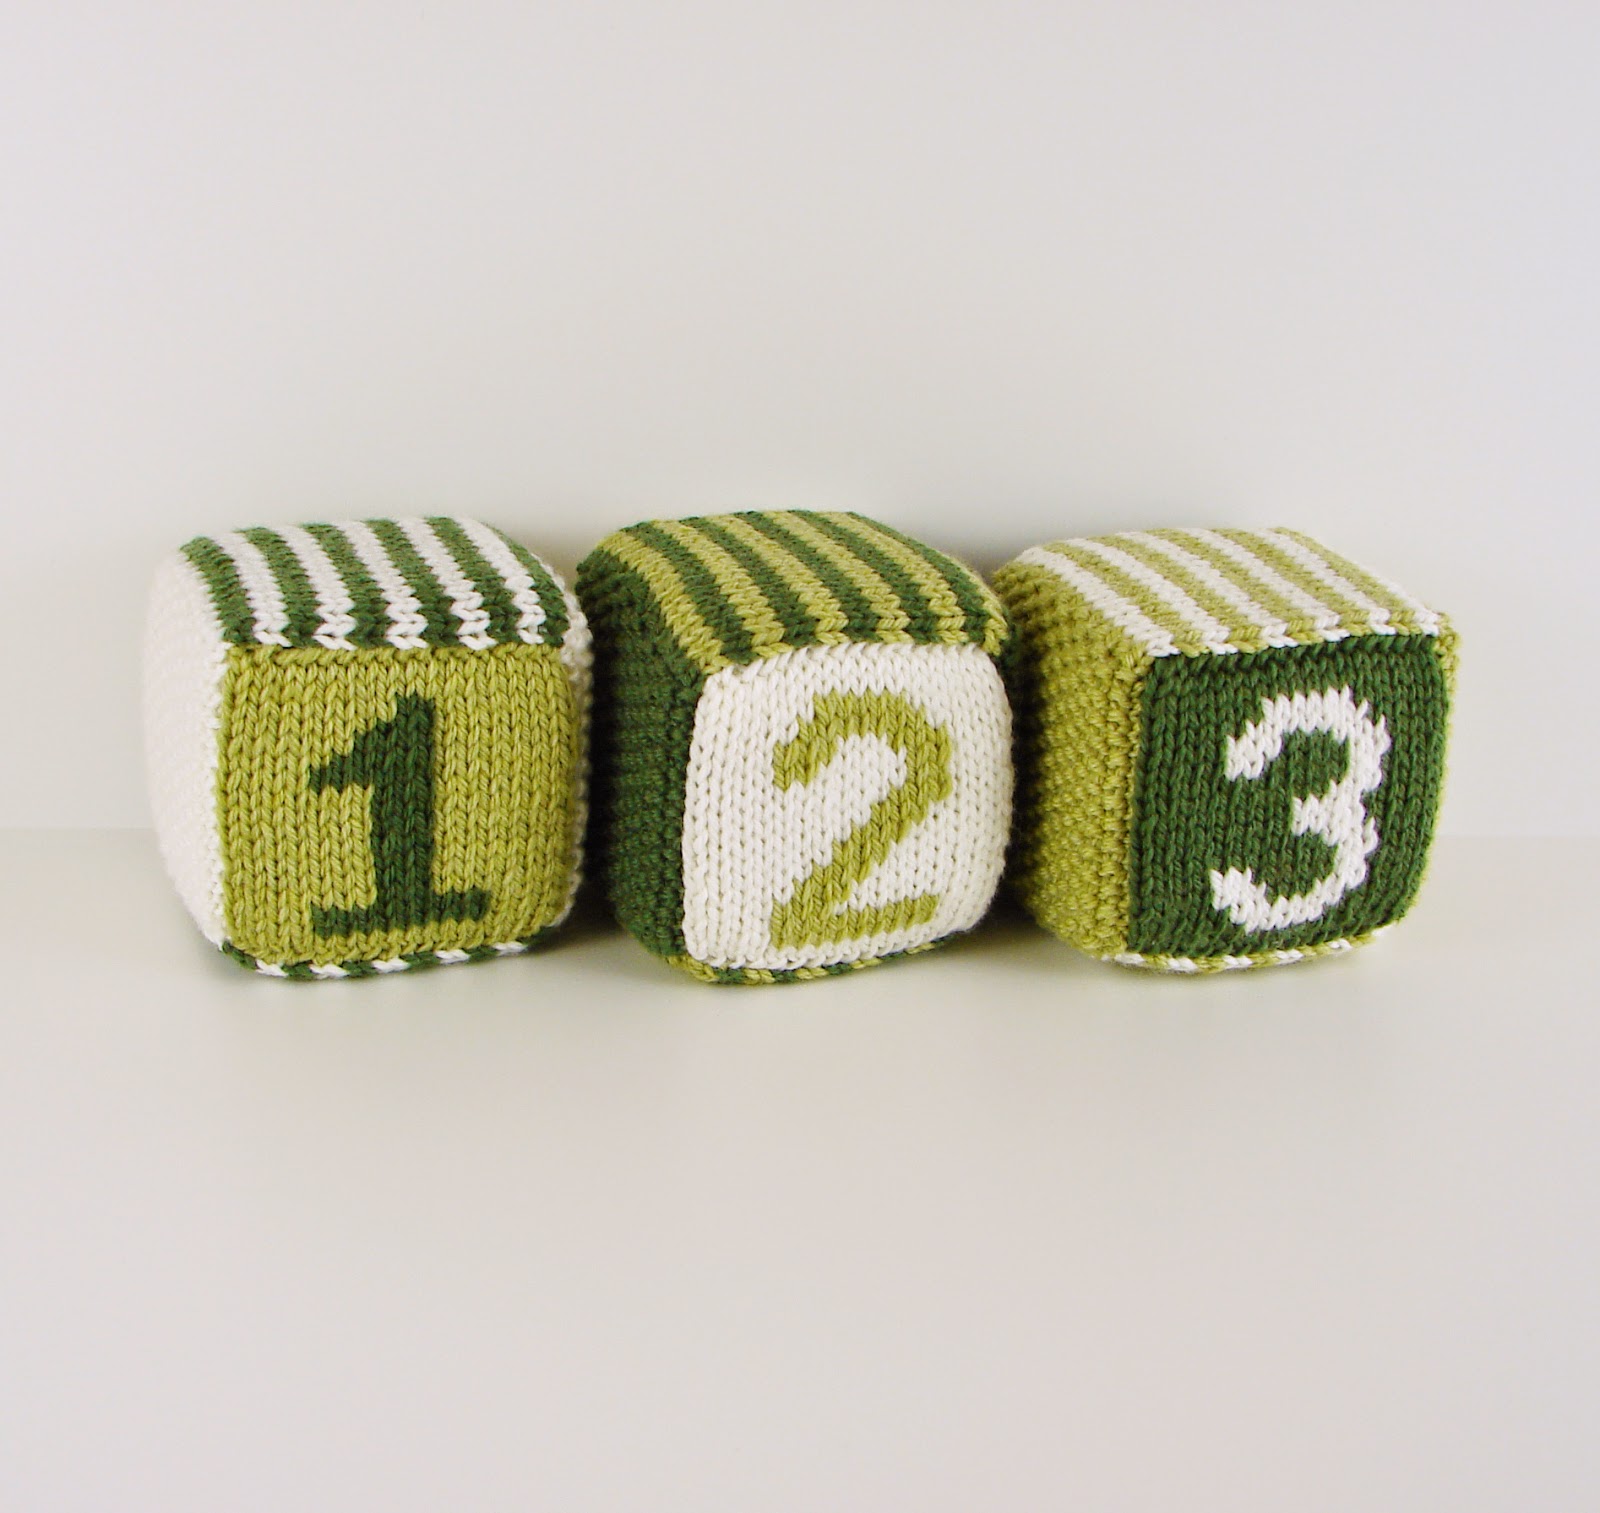 knit, blocks, foam, toys, hand knit, letter, number, striped, white, green